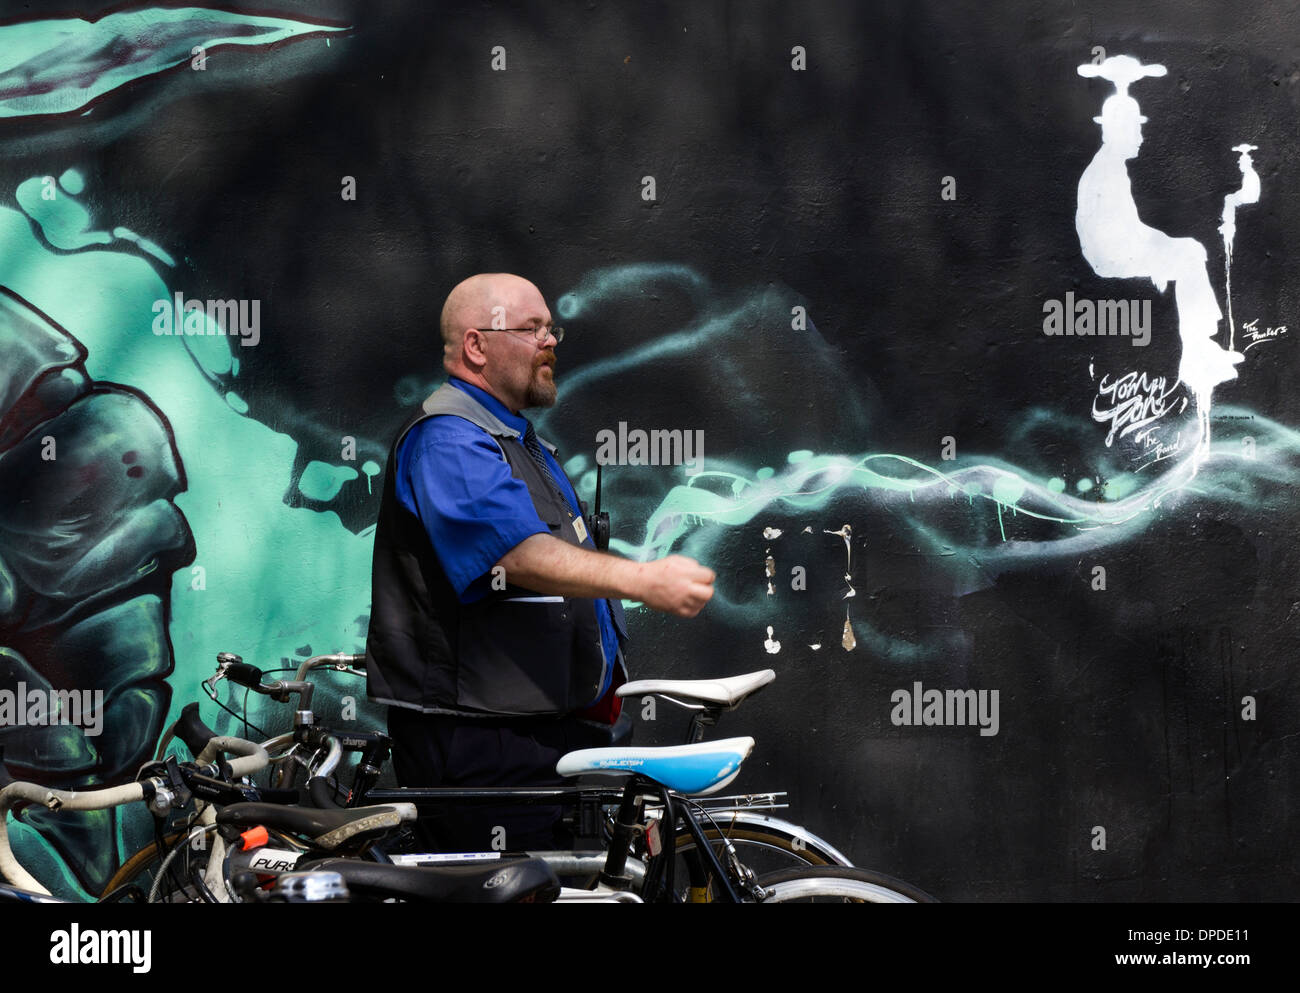 Uniformed man by wall graffiti behind a bicycle parking space Brick Lane area, East London E1 UK Stock Photo